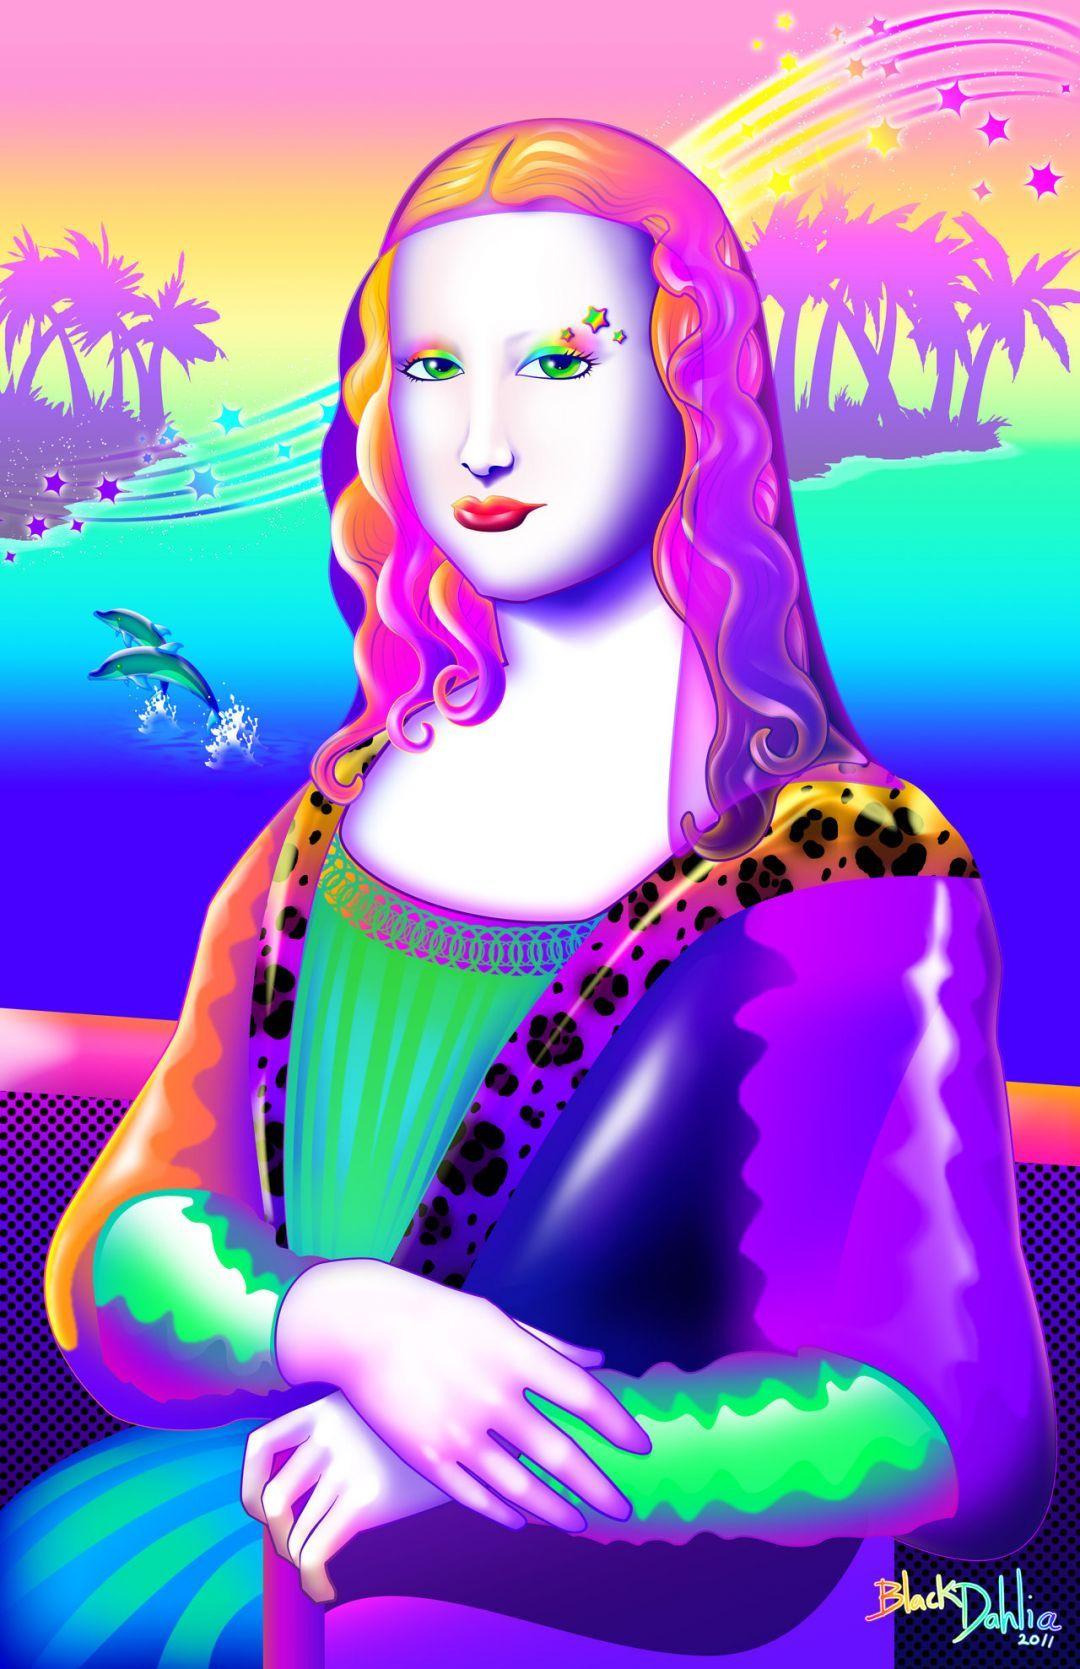 Introducing My New Web Design Lisa Frank Chic  A Simpler Design a hub  for all things creative STYLIST  PHOTOGRAPHY  GRAPHIC DESIGN  HOME DECOR